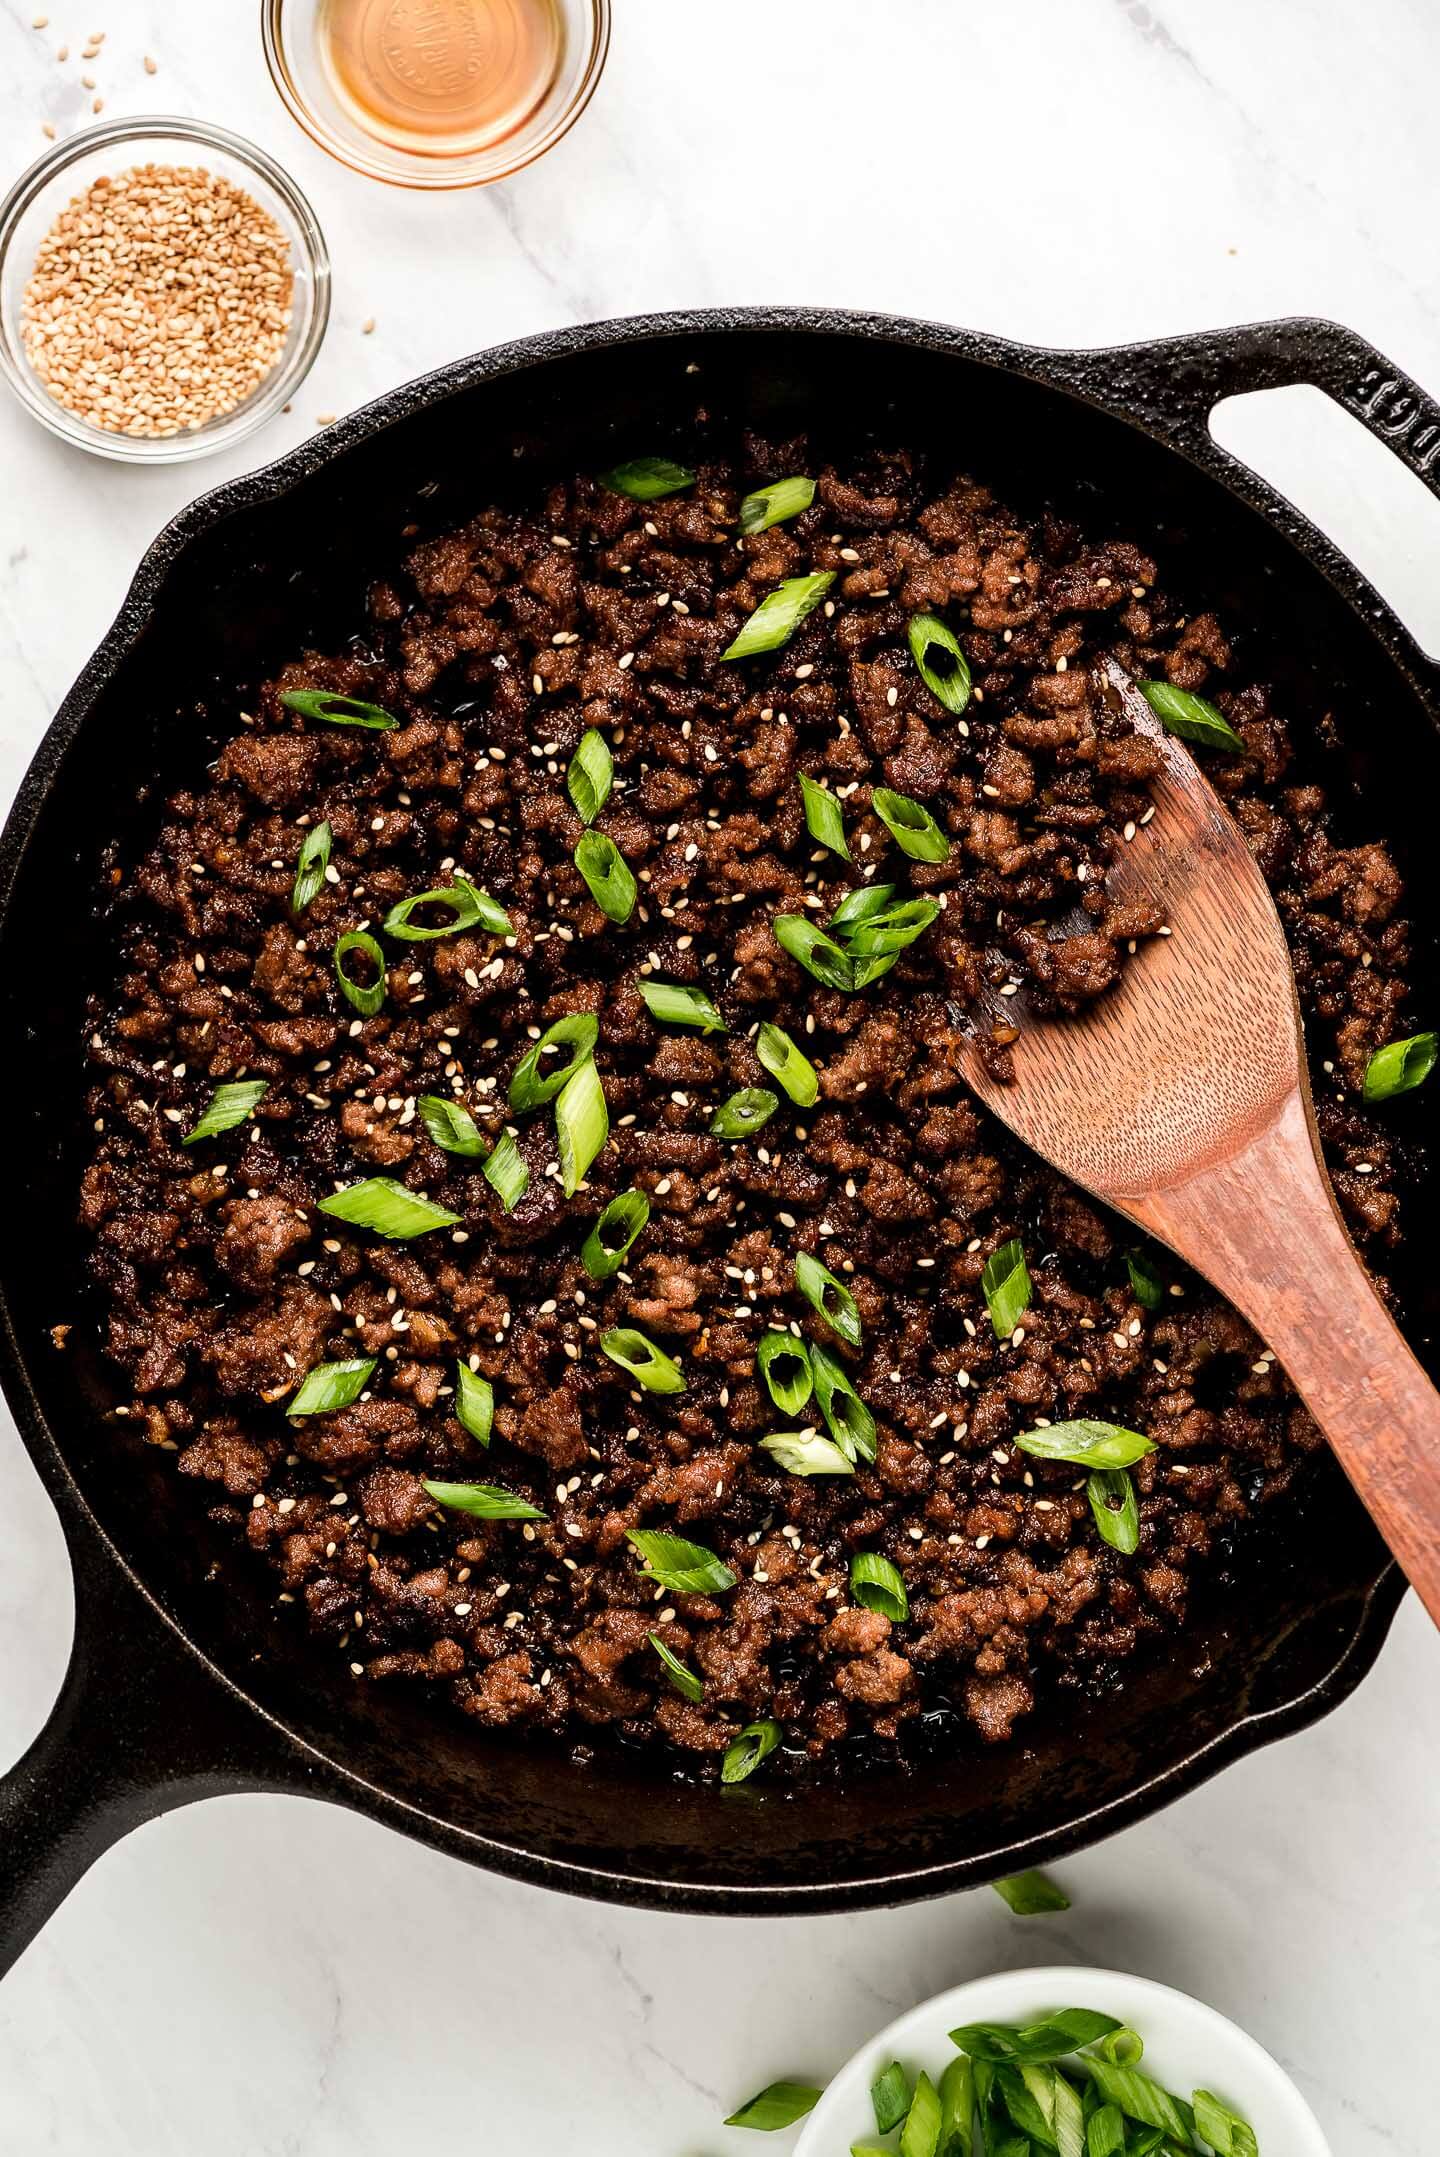 Skillet of Korean Ground Beef garnished with green onions, sesame seeds, and oil.